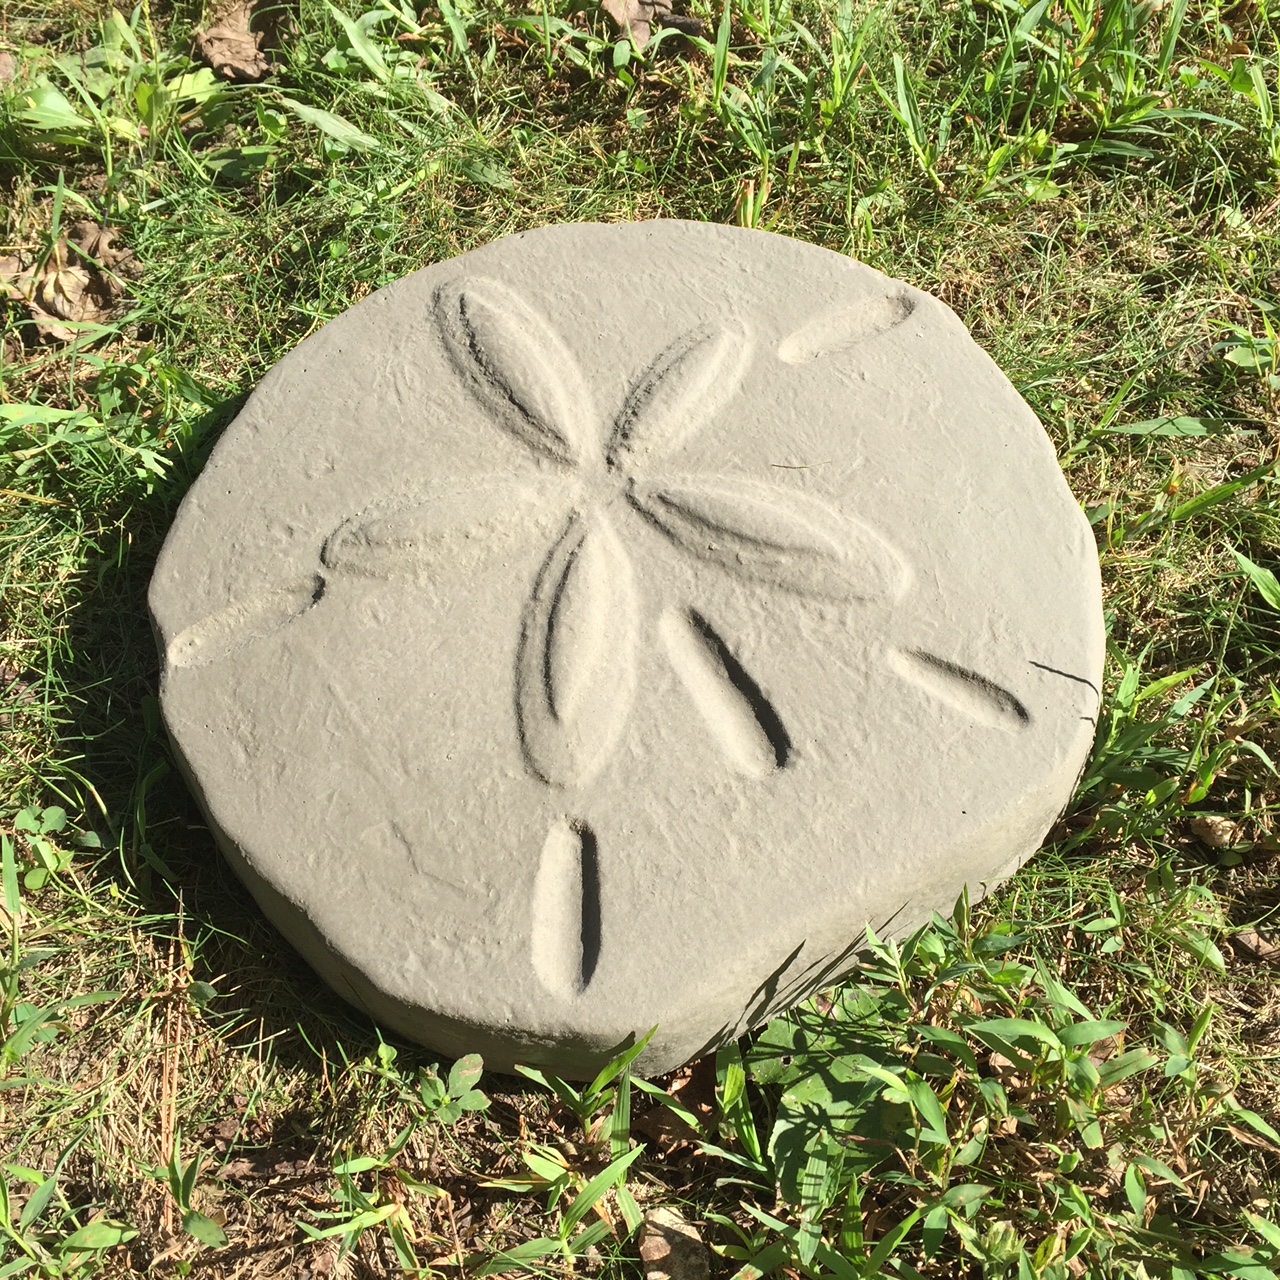 Concrete Stepping Stone Molds for sale and instructions on how to make